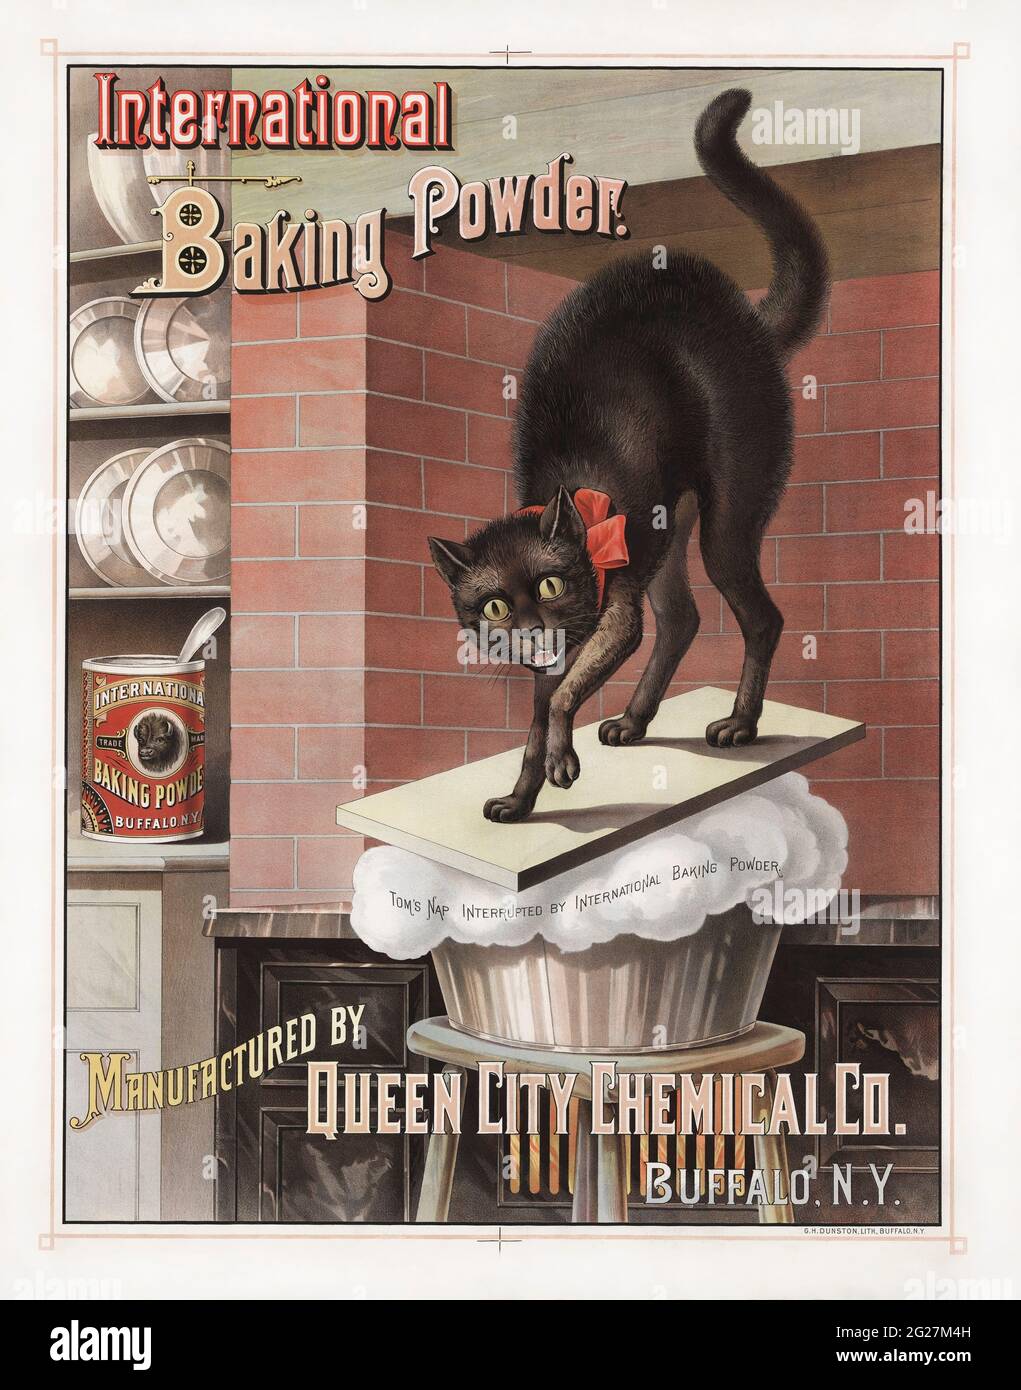 Advertisement for International Brand Baking Powder, showing a cat awakened by bread rising. Stock Photo